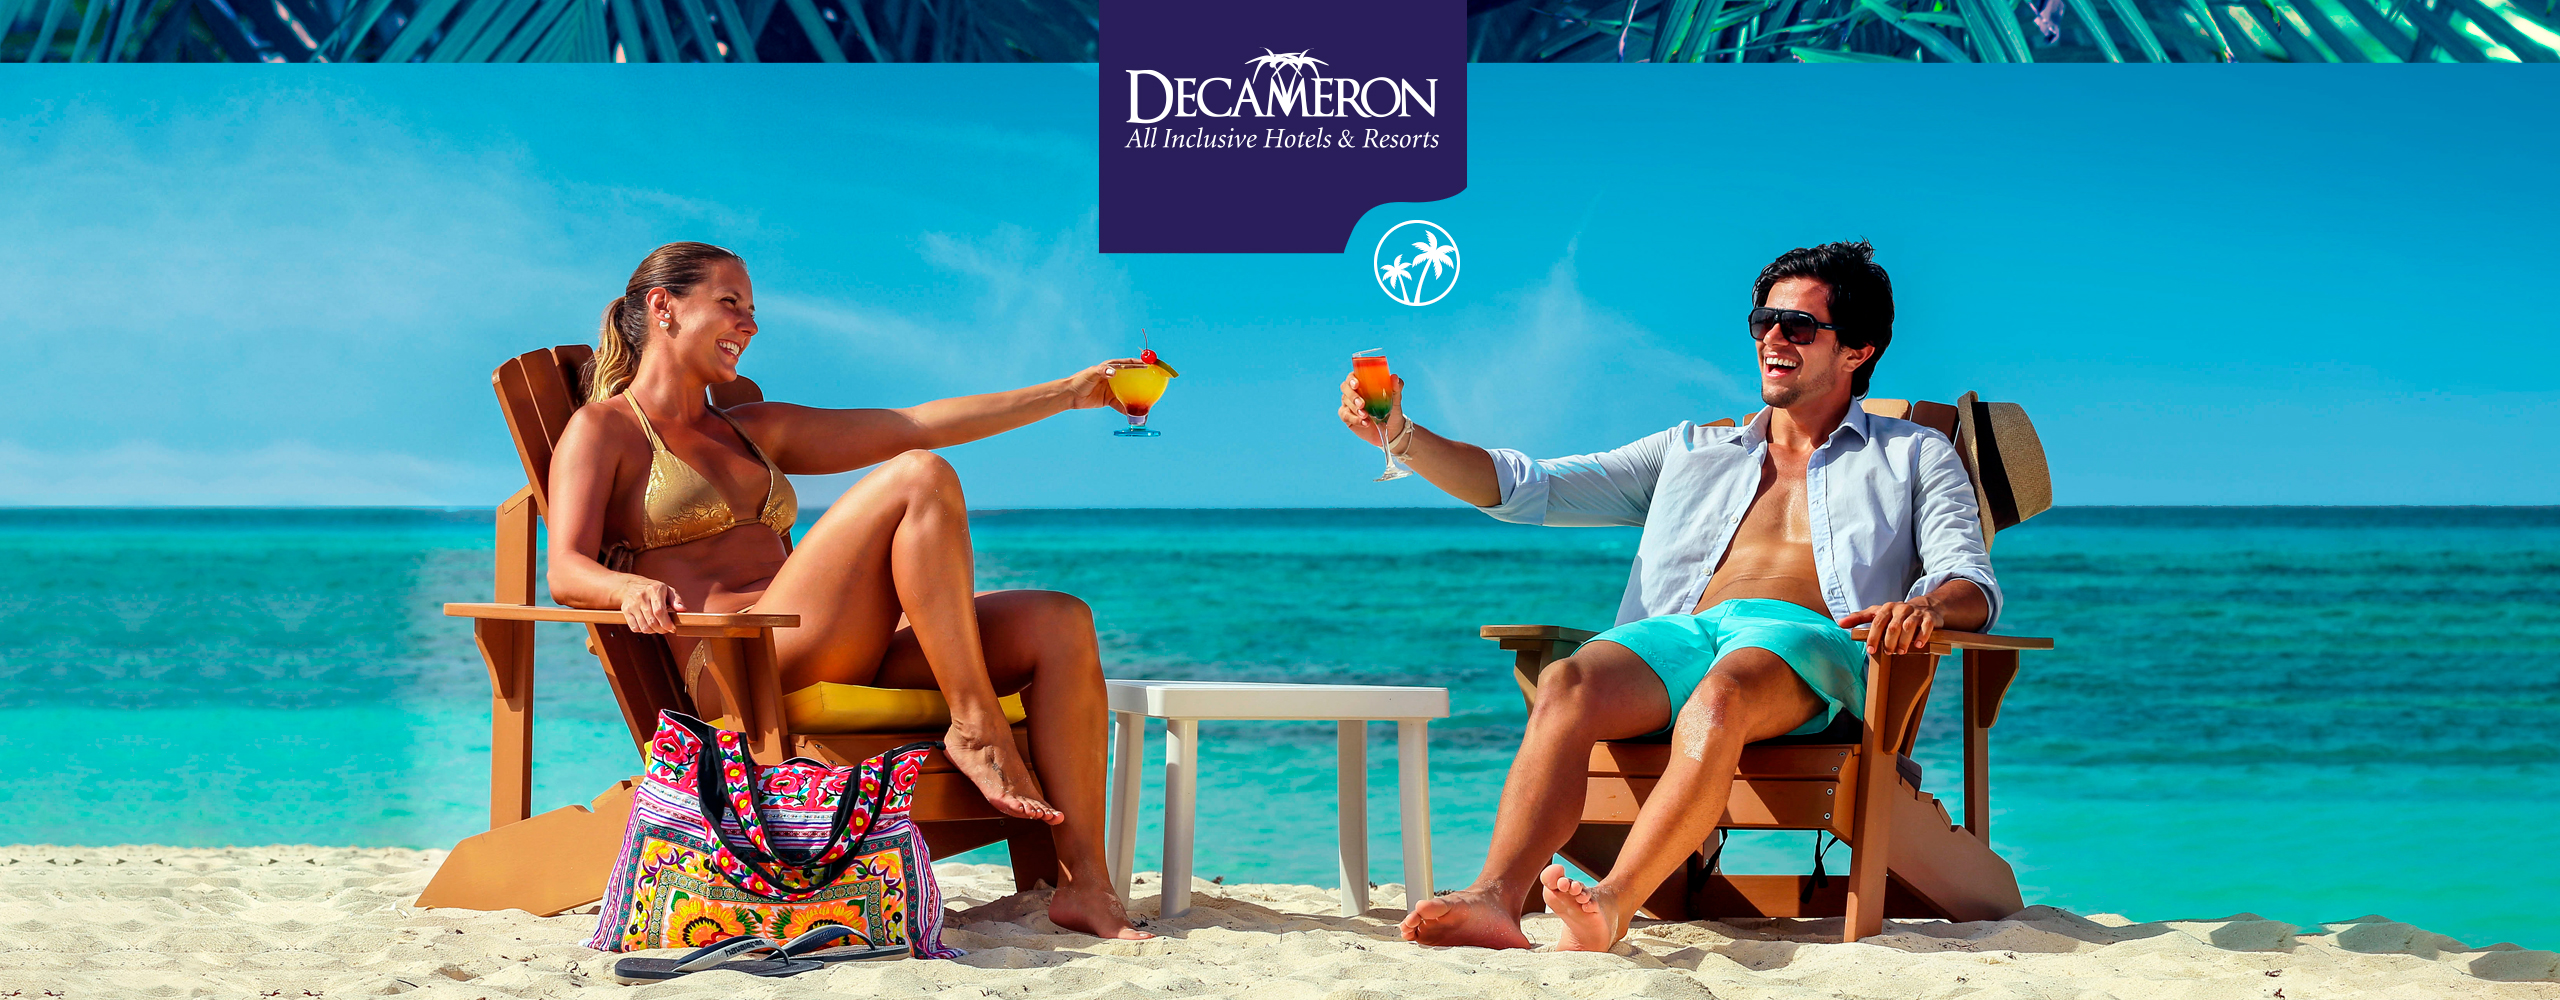 Decameron All Inclusive Hotels & Resorts